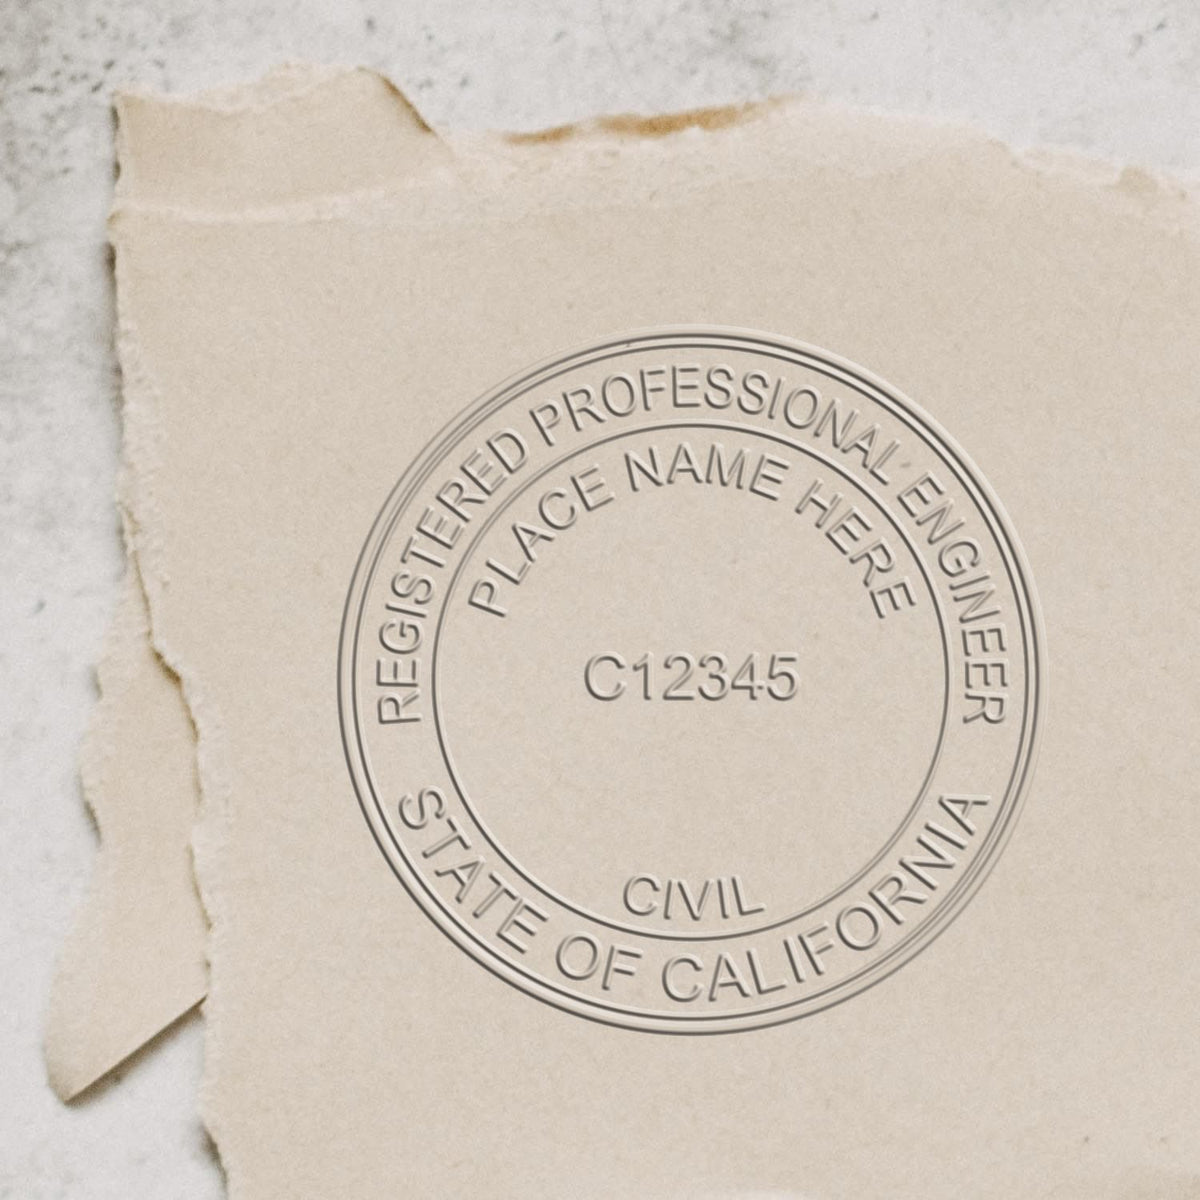 A stamped impression of the California Engineer Desk Seal in this stylish lifestyle photo, setting the tone for a unique and personalized product.